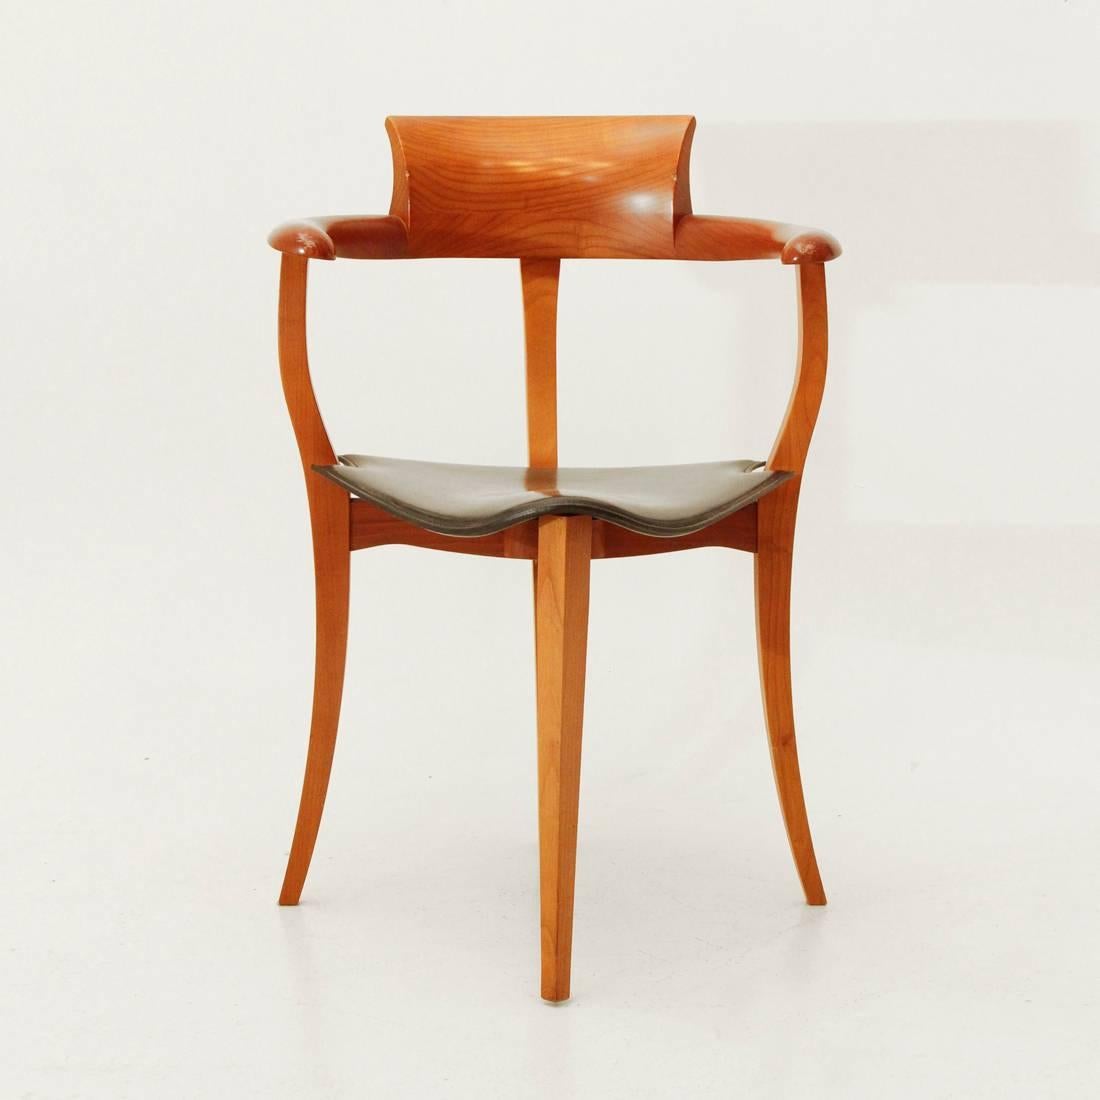 Chair produced by Acerbis International in 1993 on a project by David Palterer,
Italian architect, designer and Israeli artist who lives and works in Florence.
Structure with armrests and backrest in wood, seat in black leather.
Good general